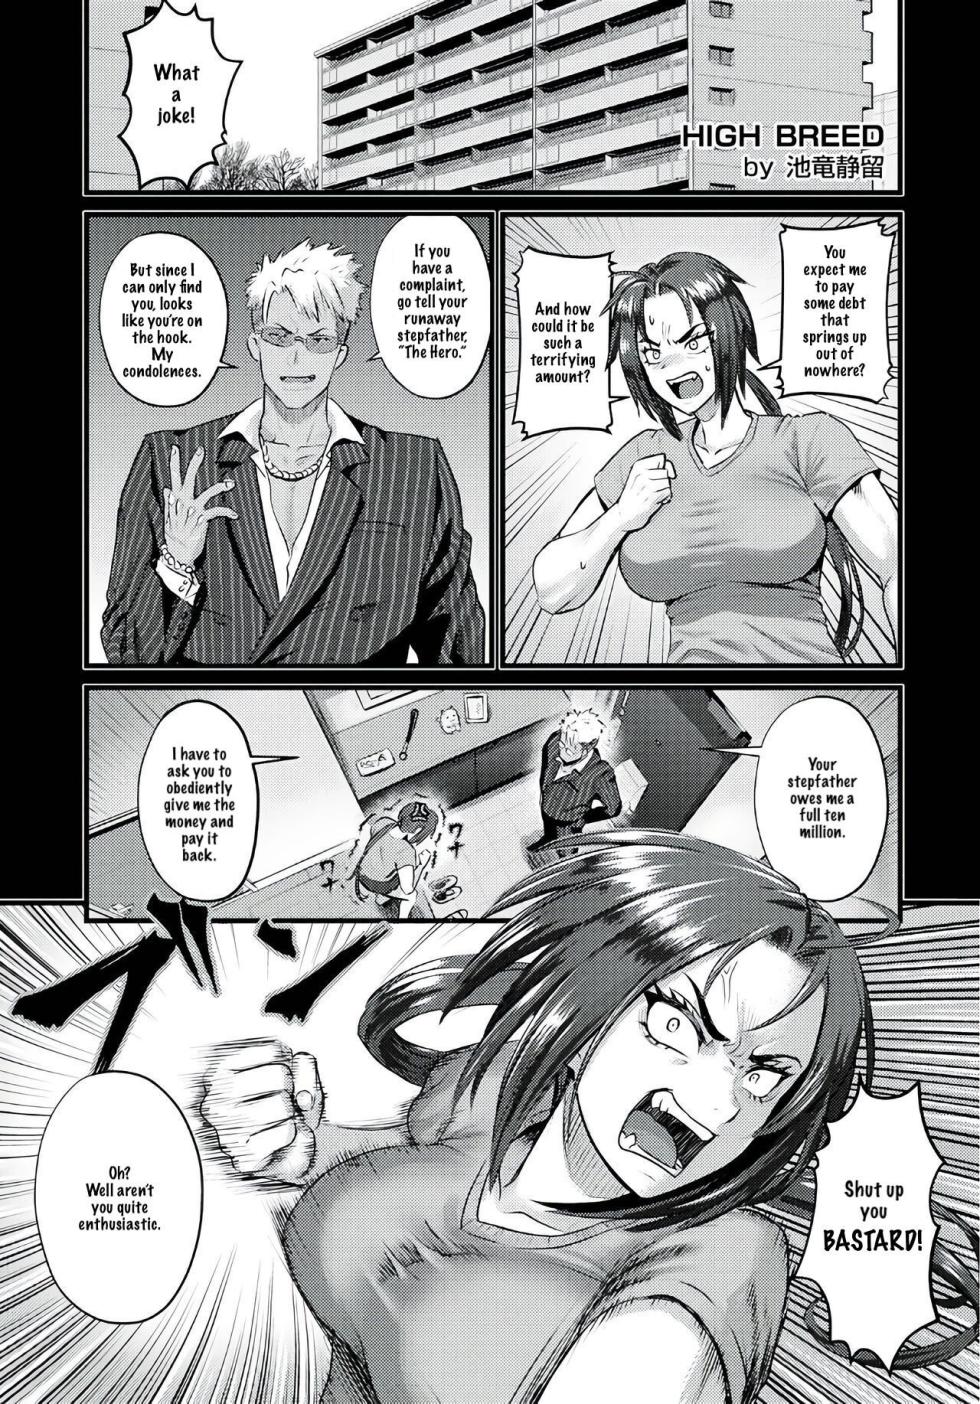 High Breed [English] - Page 1